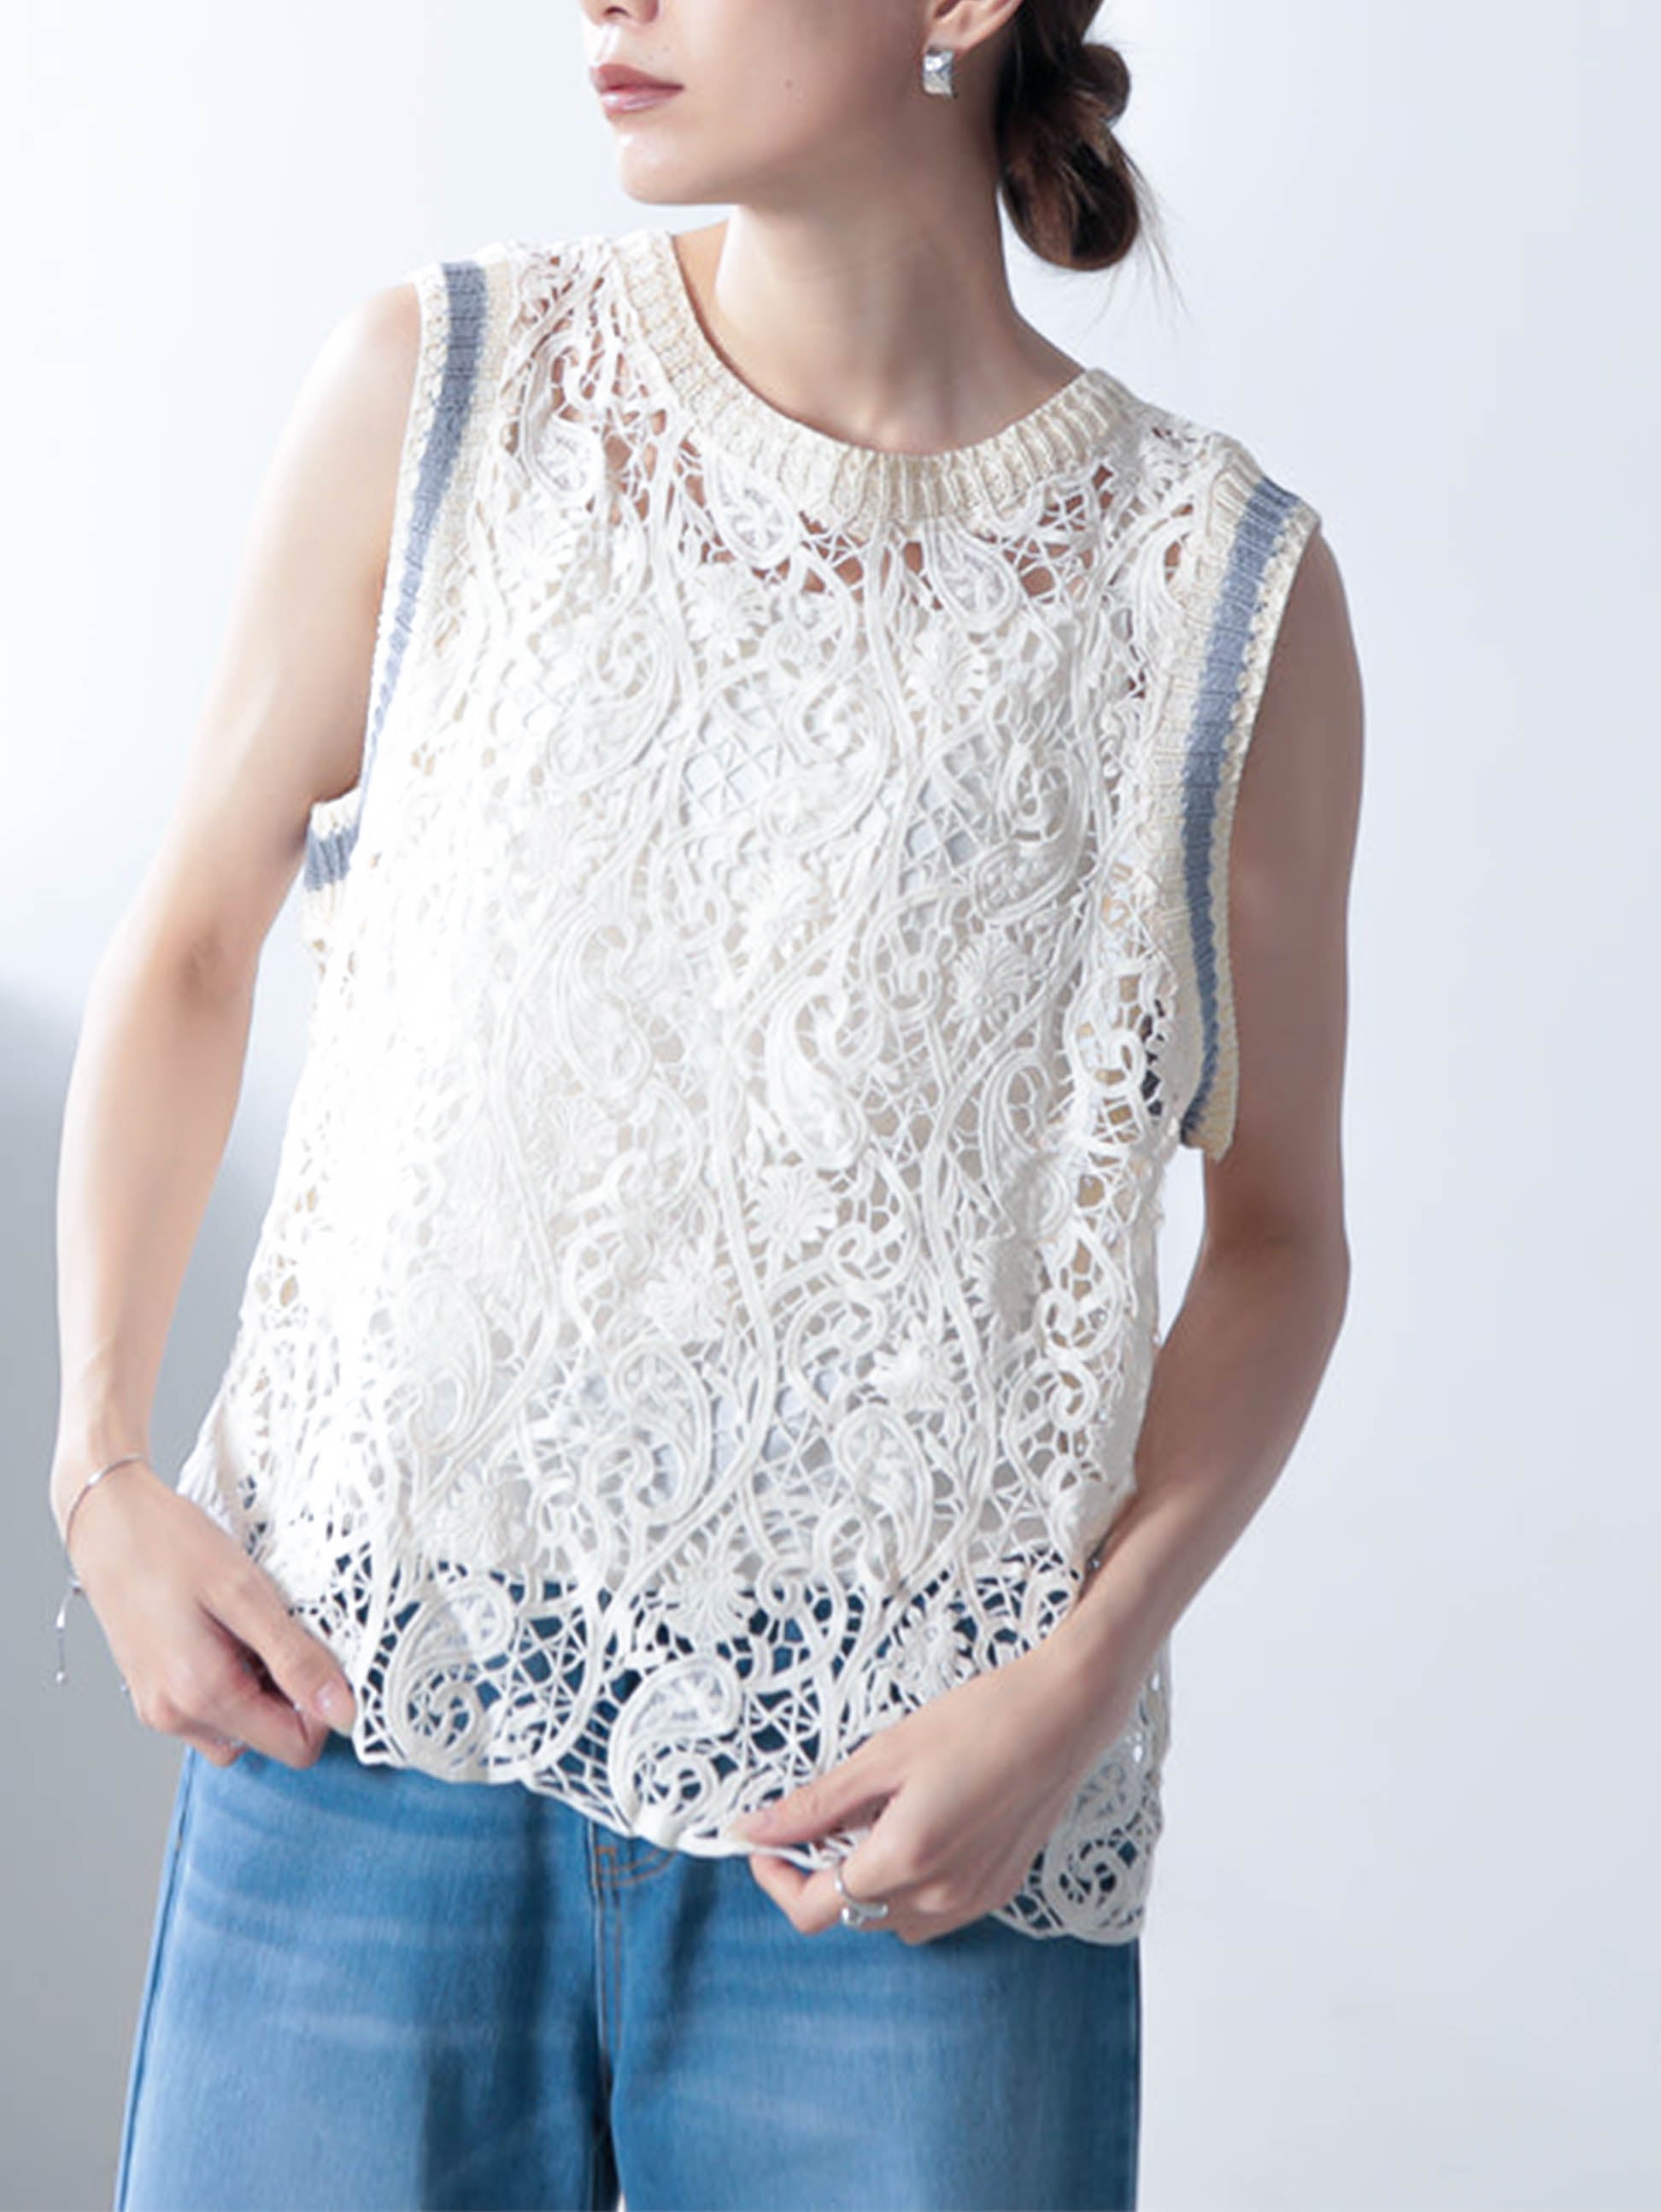 All lace gilet